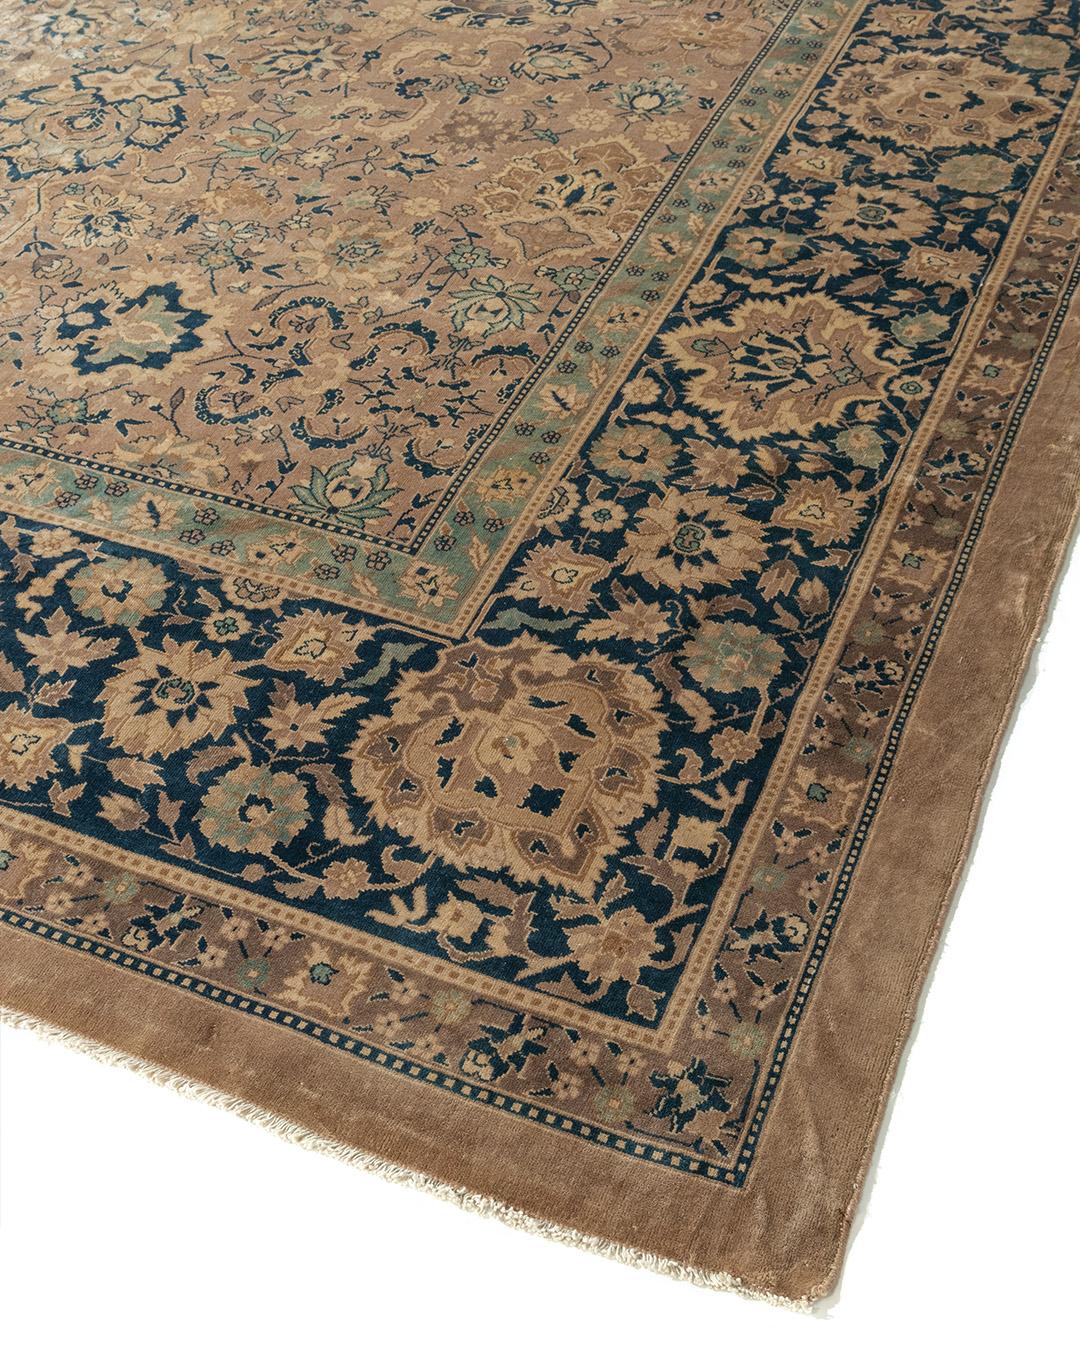 Vintage oversize Indo Kirman rug, 14'7 x 23'9. Very intricate poly-chromatic floral patterns cover the tan central field and are surrounded by a Persian blue border with complex floral designs.